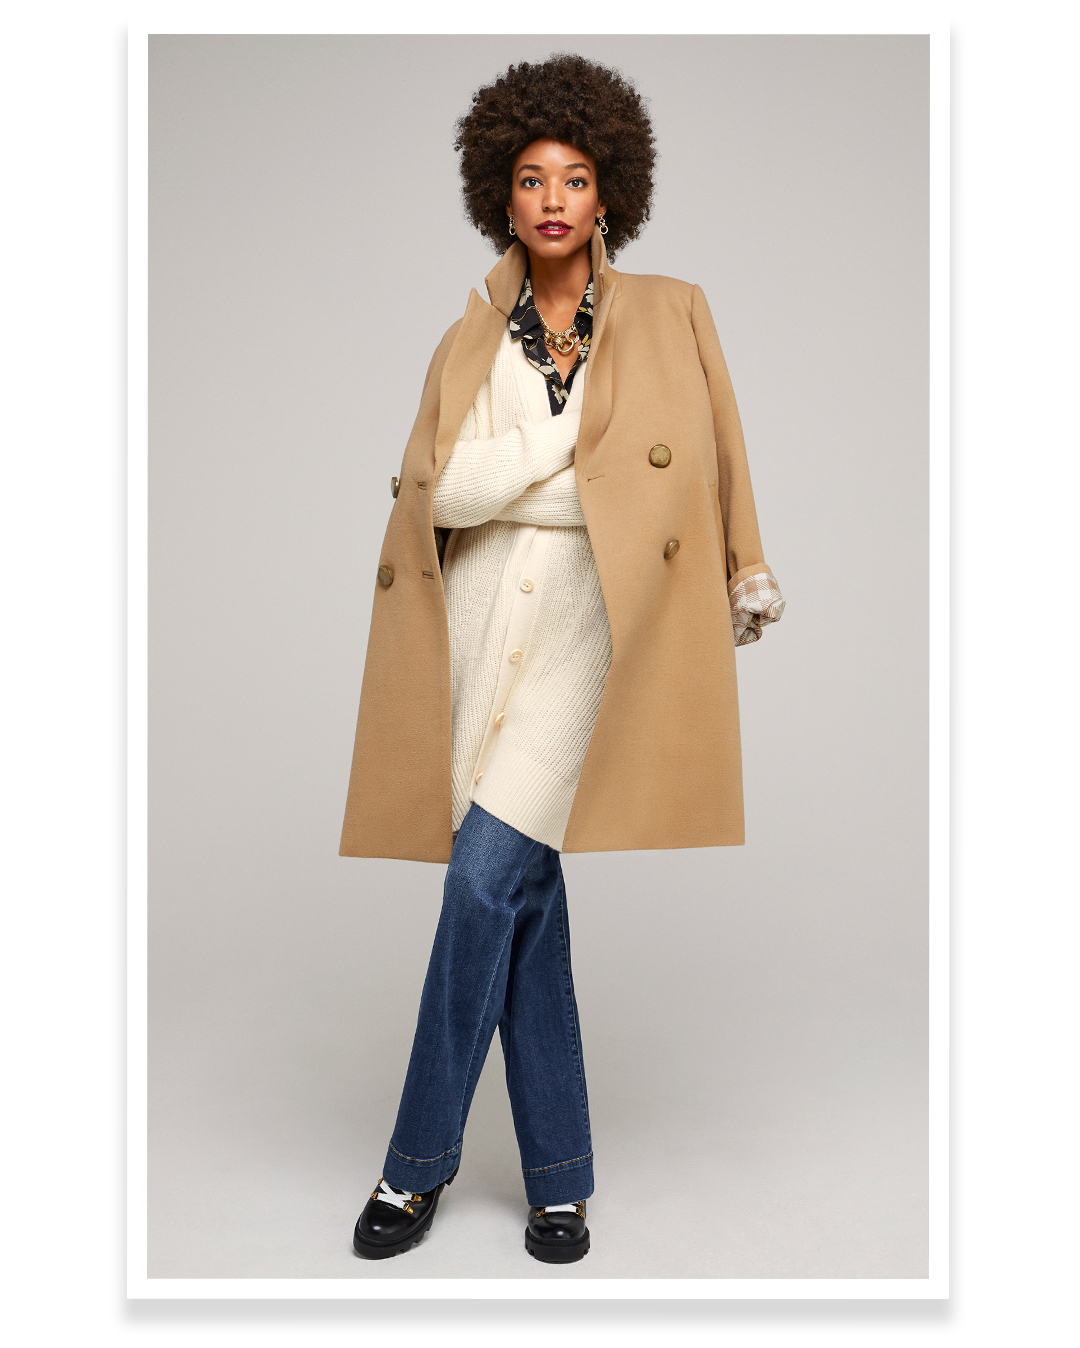 fashion flash: all-new, blazing hot styles - Cabi Spring 2024 Collection